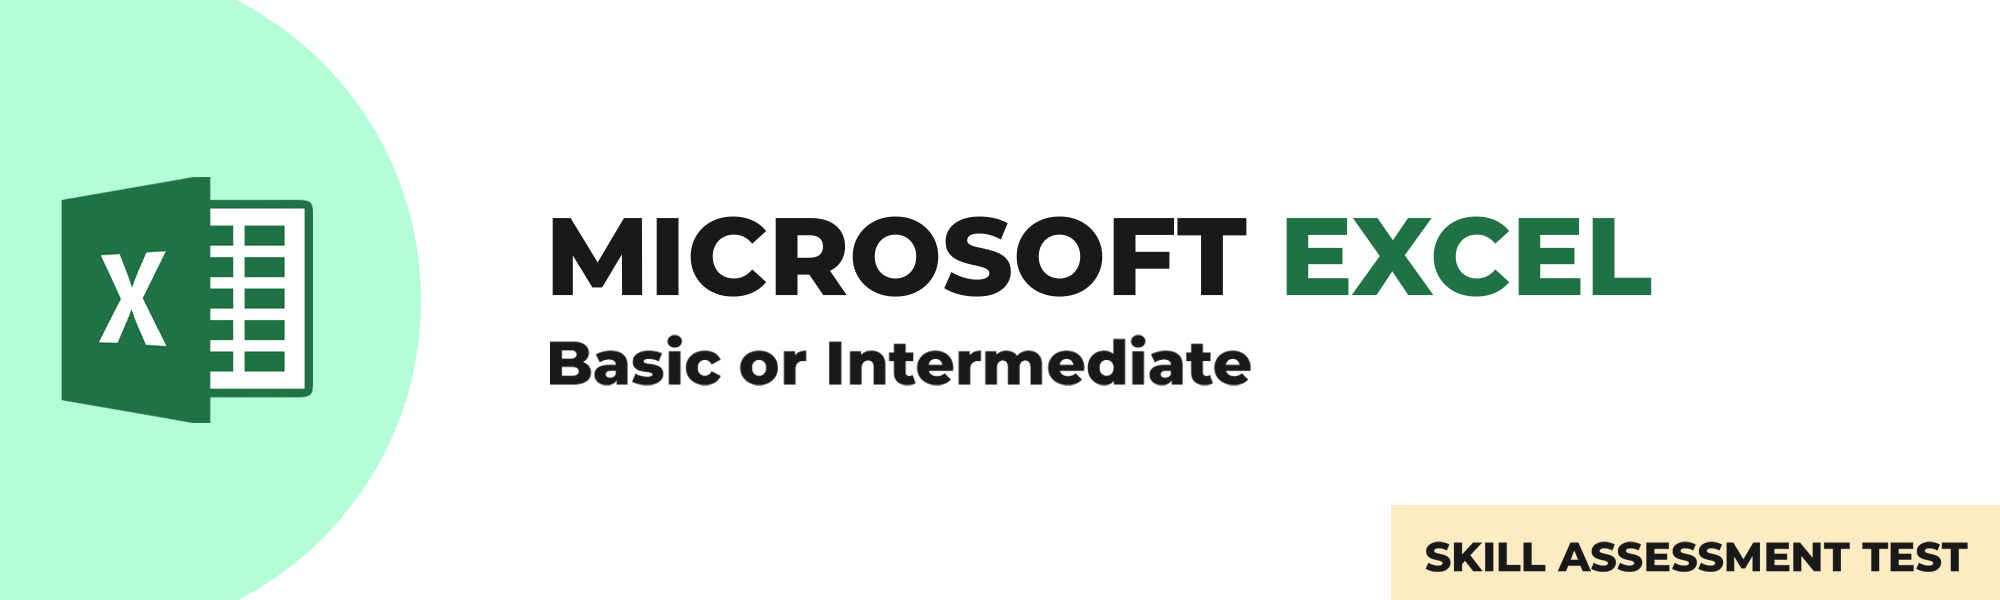 Microsoft Excel Course in Singapore